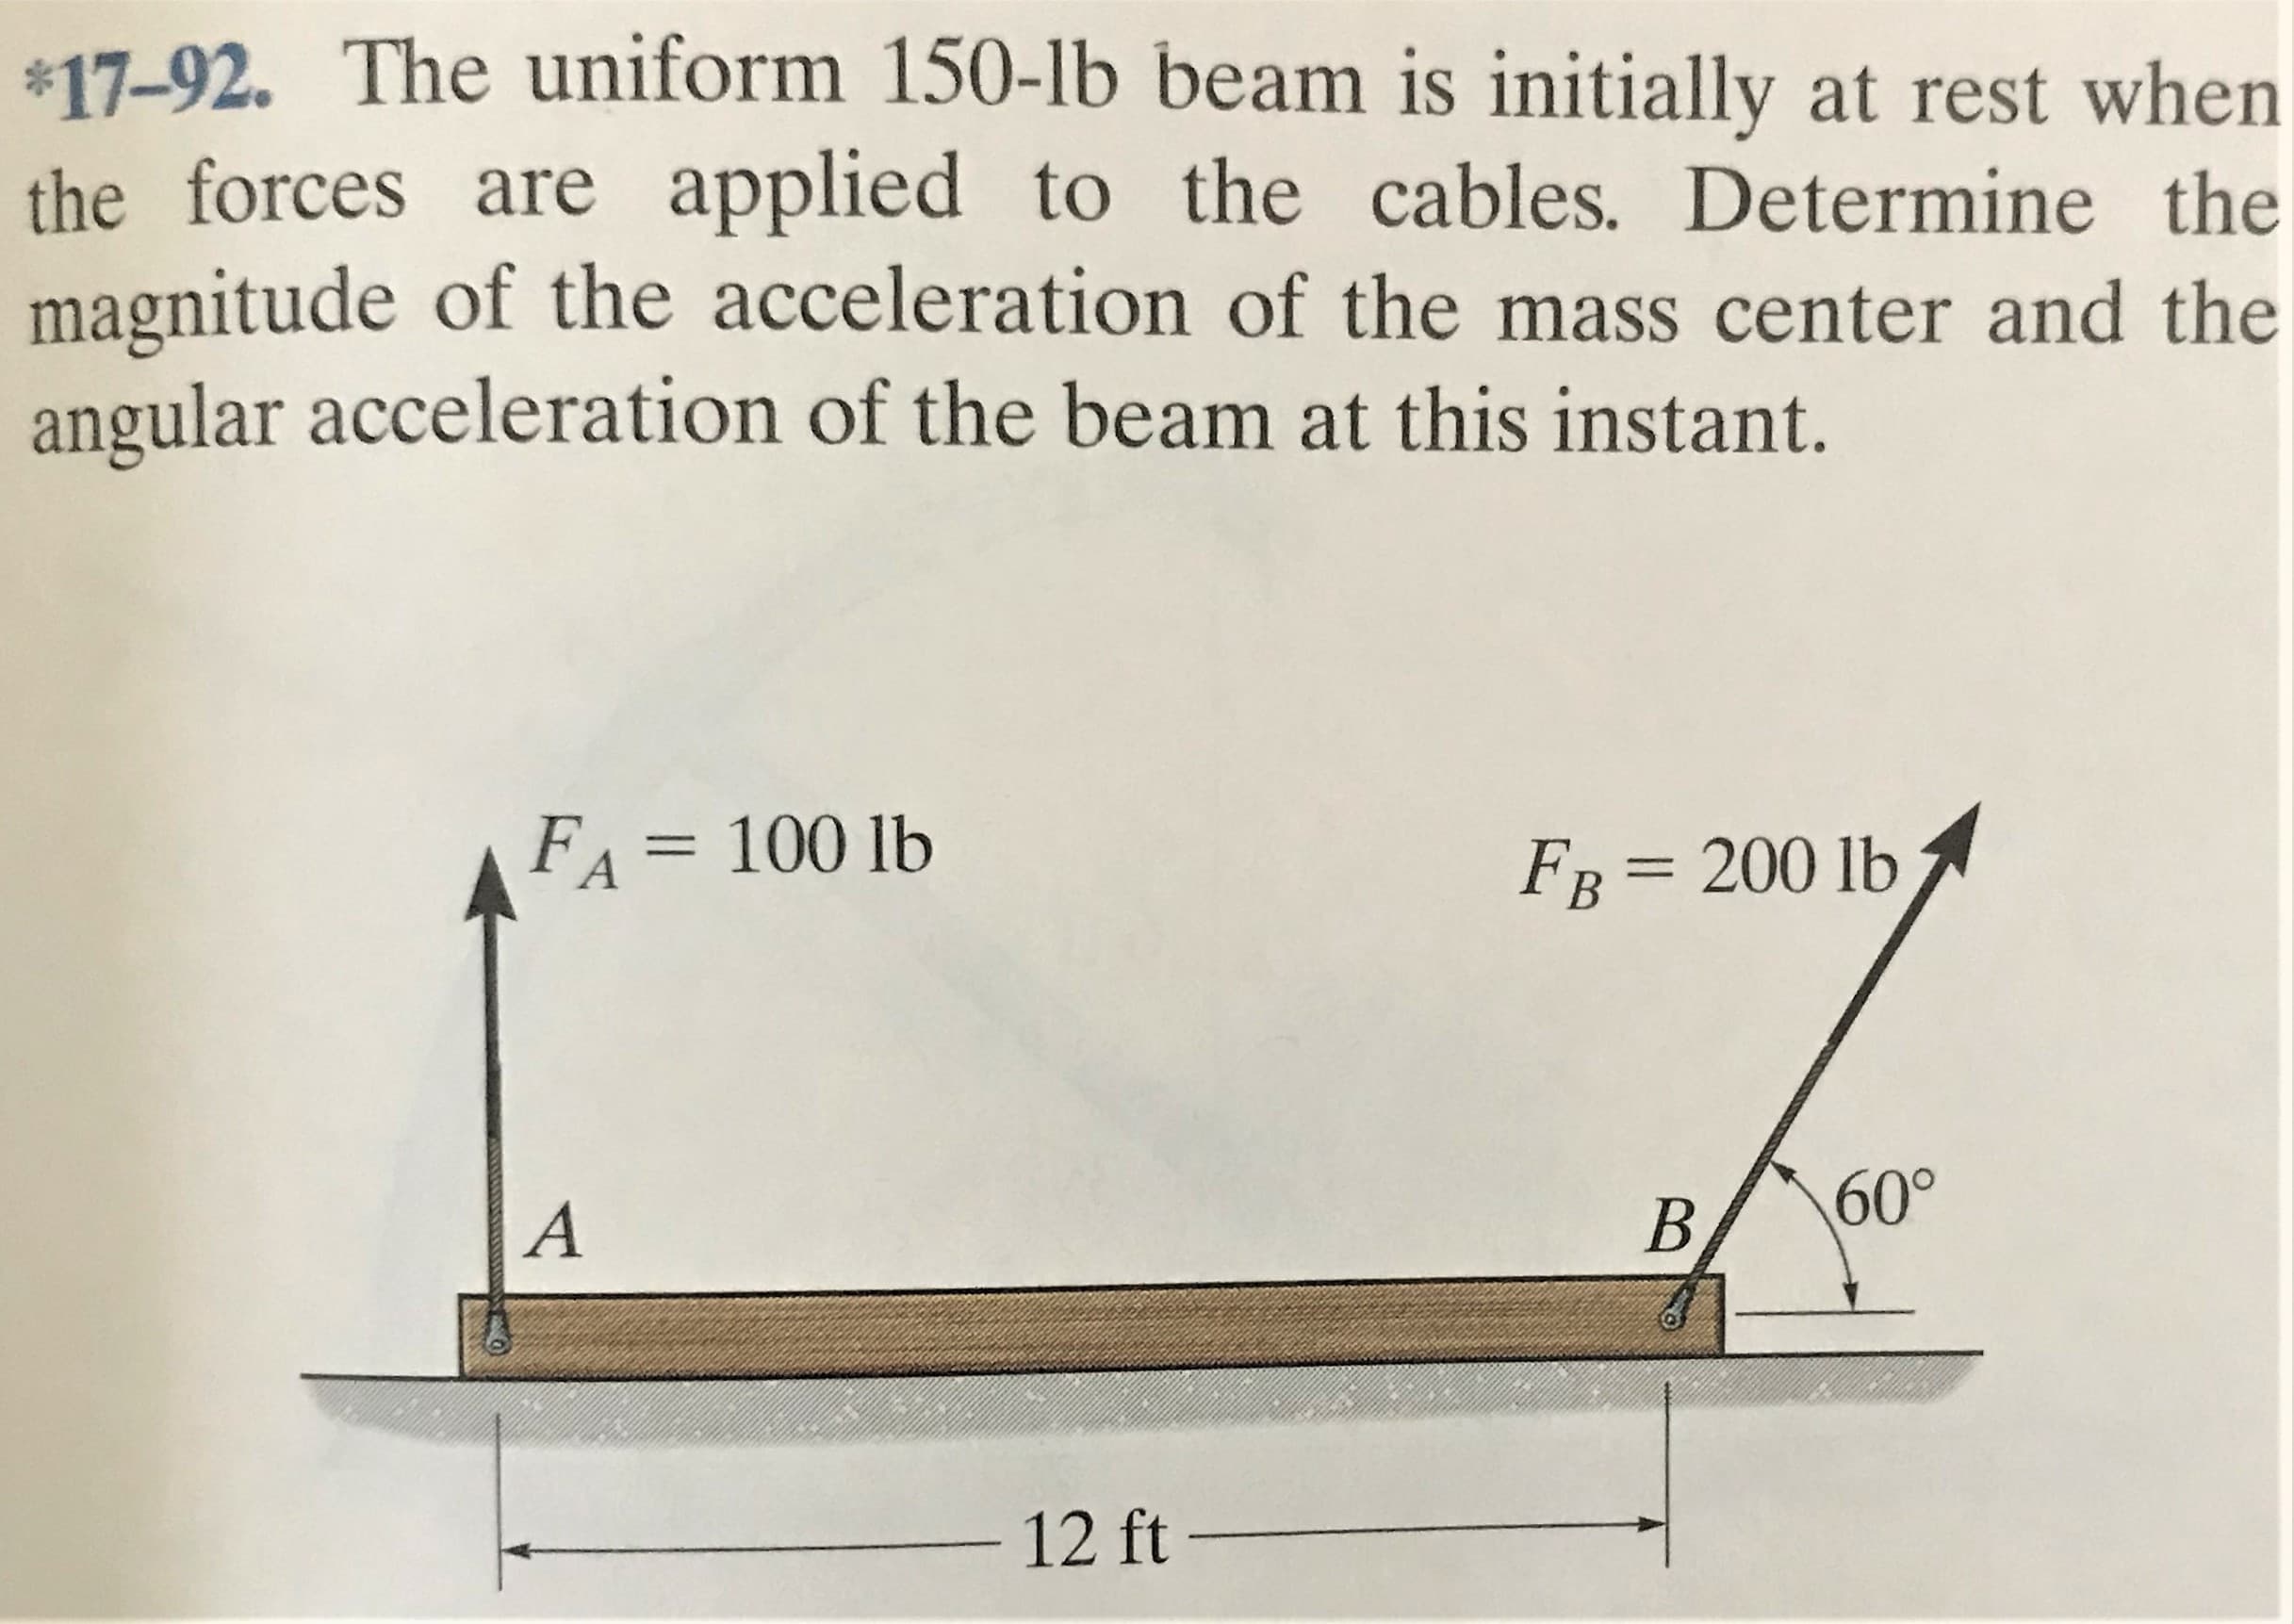 *17-92. The uniform 150-lb beam is initially at rest when
the forces are applied to the cables. Determine the
magnitude of the acceleration of the mass center and the
angular acceleration of the beam at this instant.
FA = 100 lb
FB = 200 lb
A
B.
60°
12 ft –
